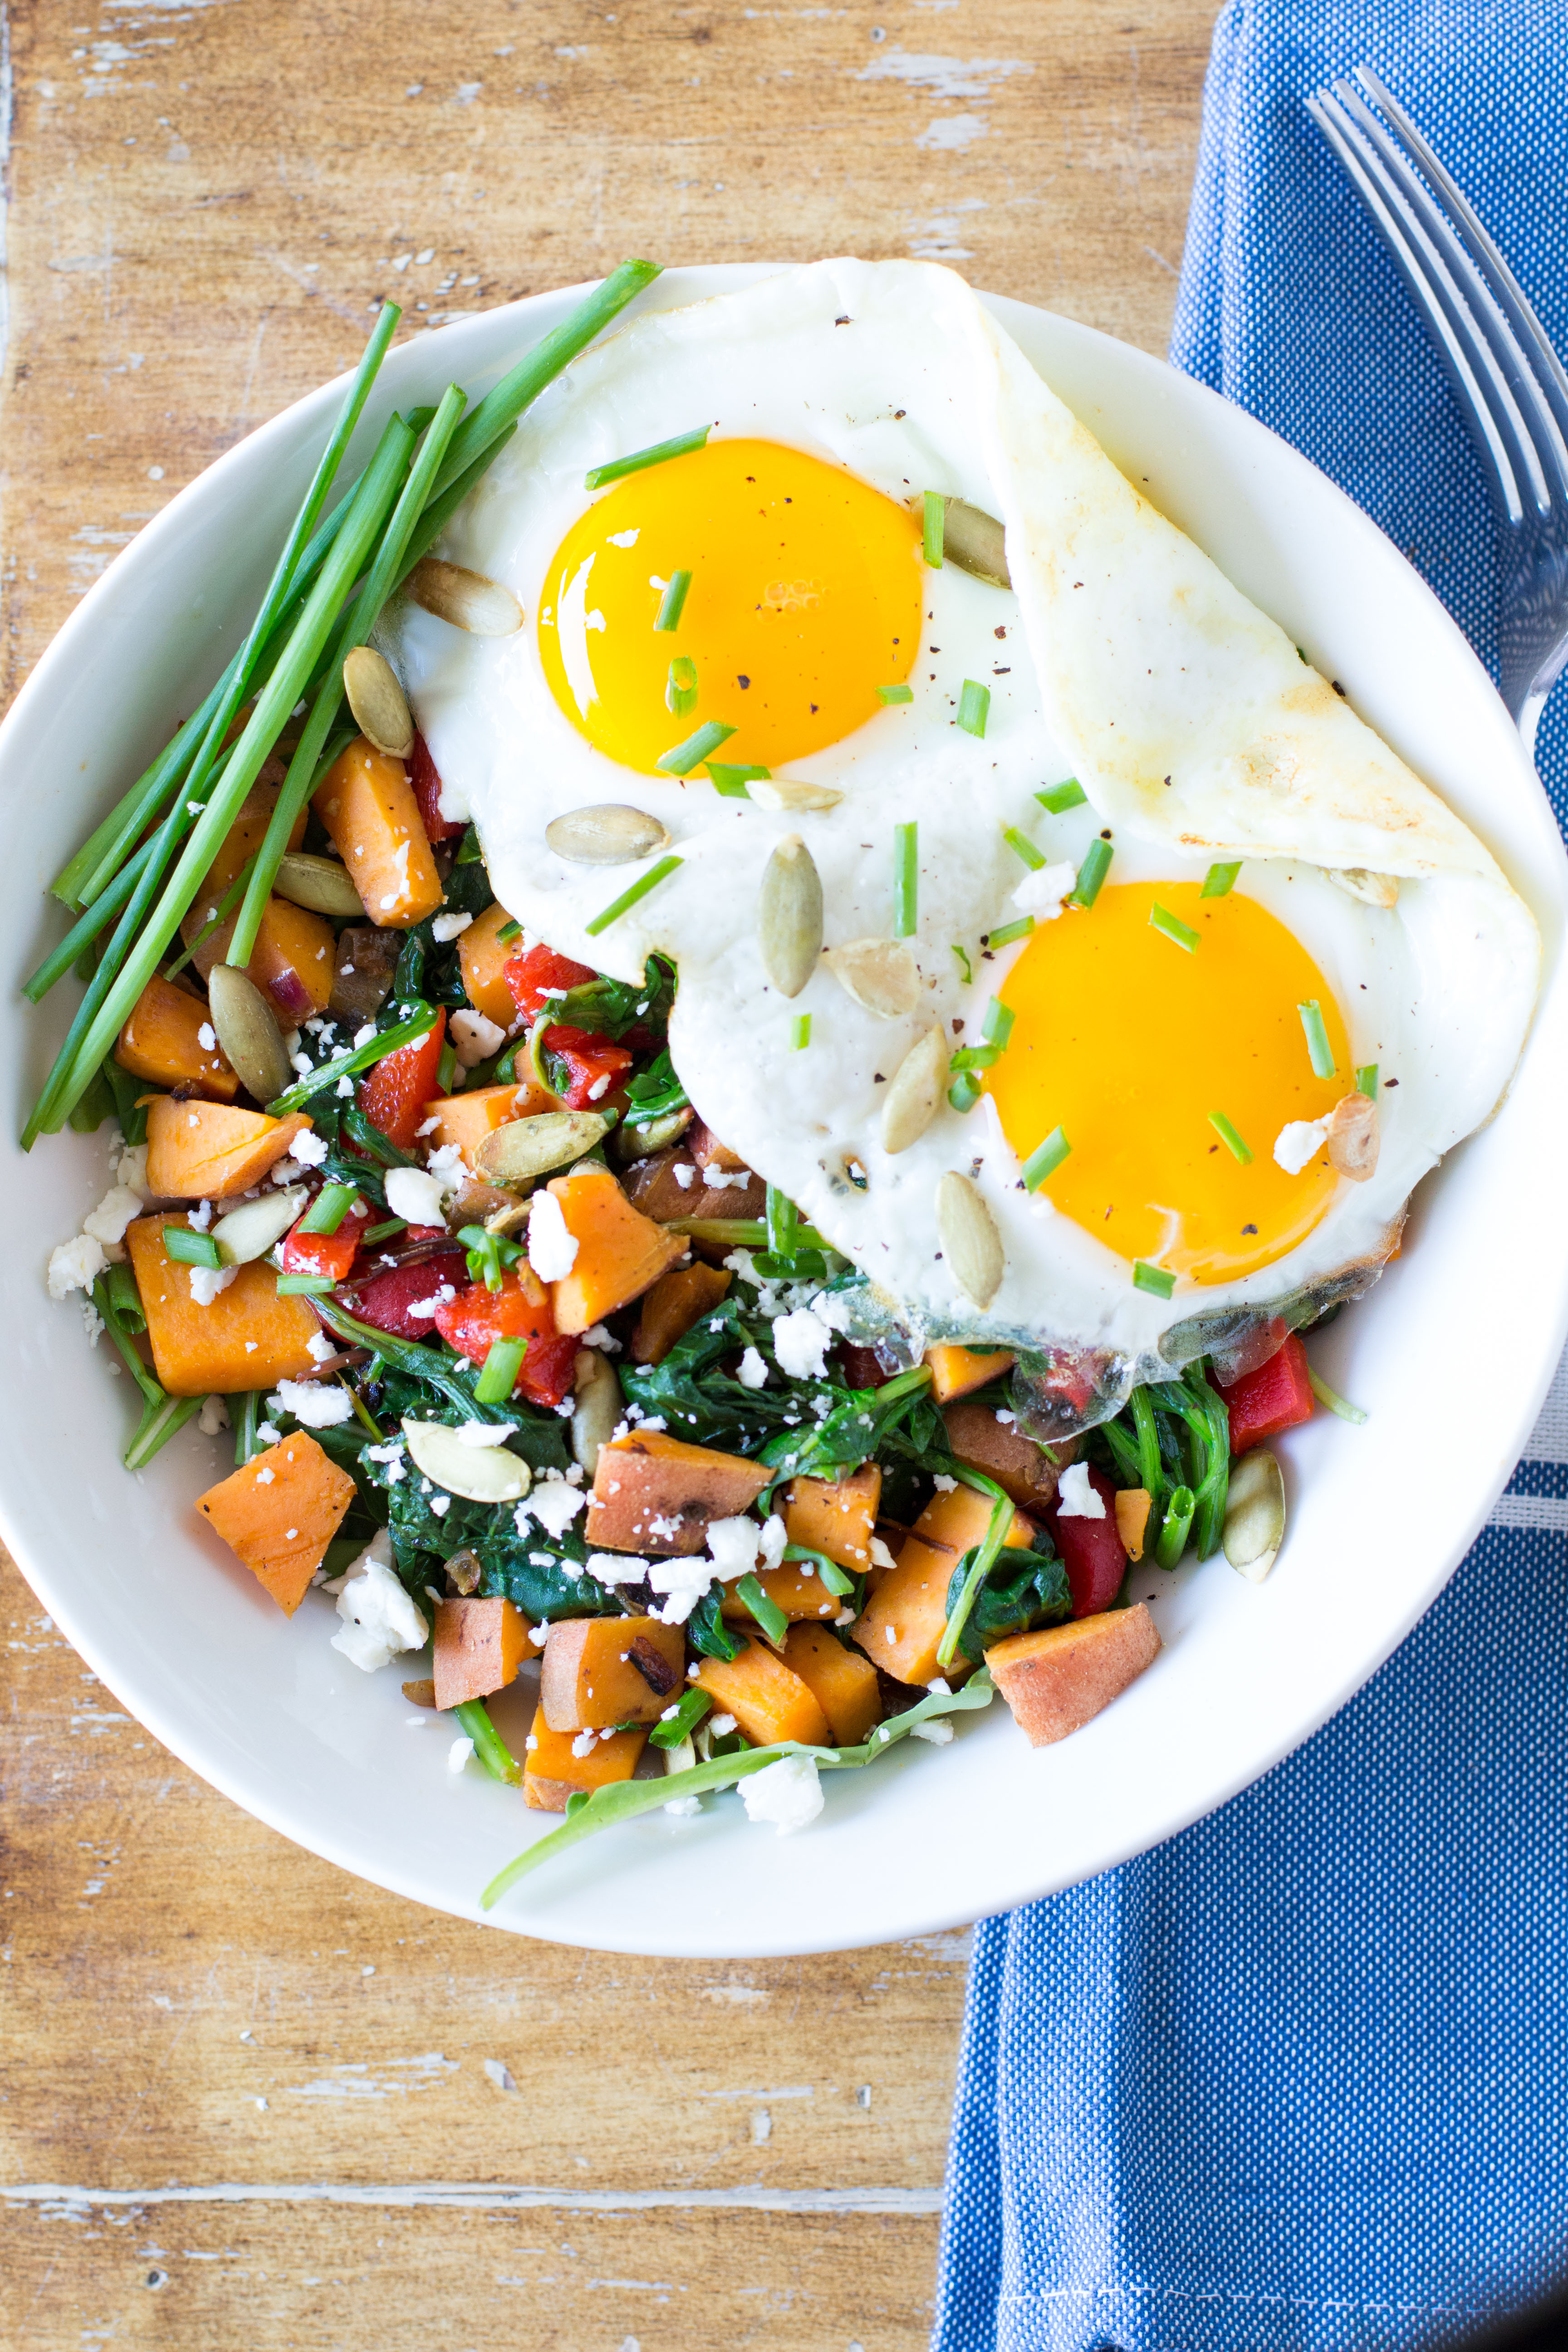 Start your day with a filling and nutritious breakfast bowl! Sweet potatoes, power greens, red pepper and onion add tons of fiber and vitamins, while fried eggs provide protein to keep you full until your next meal. 